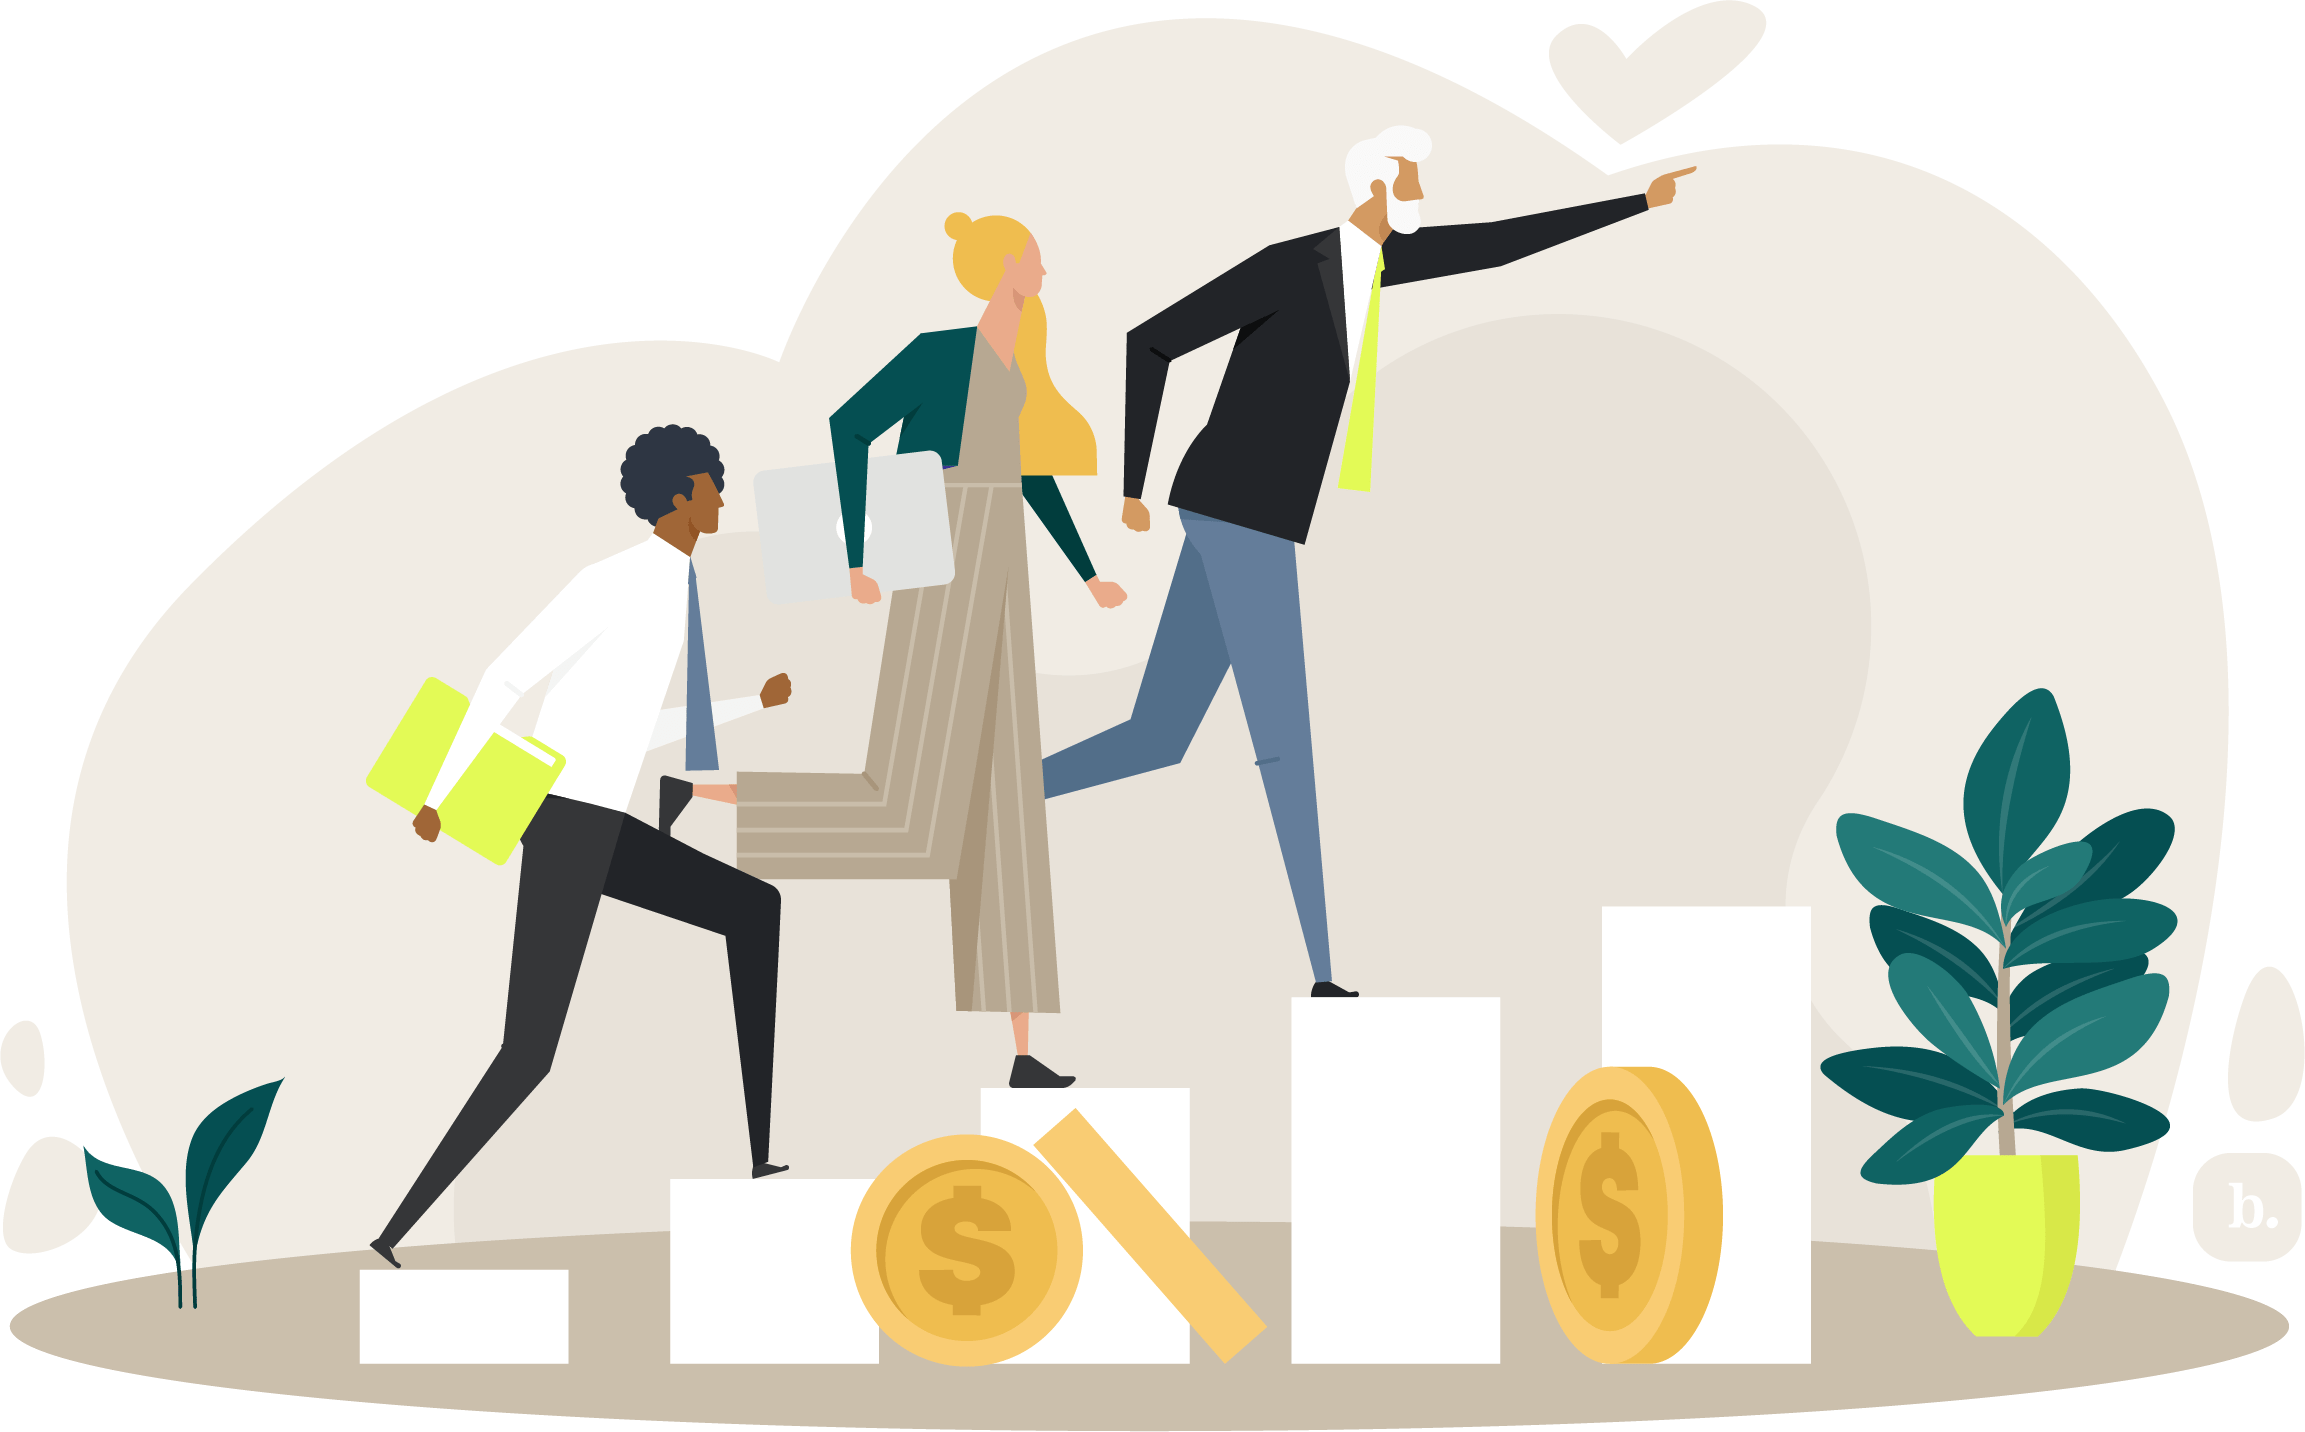 graphic of businesspeople running up steps with large coins below them